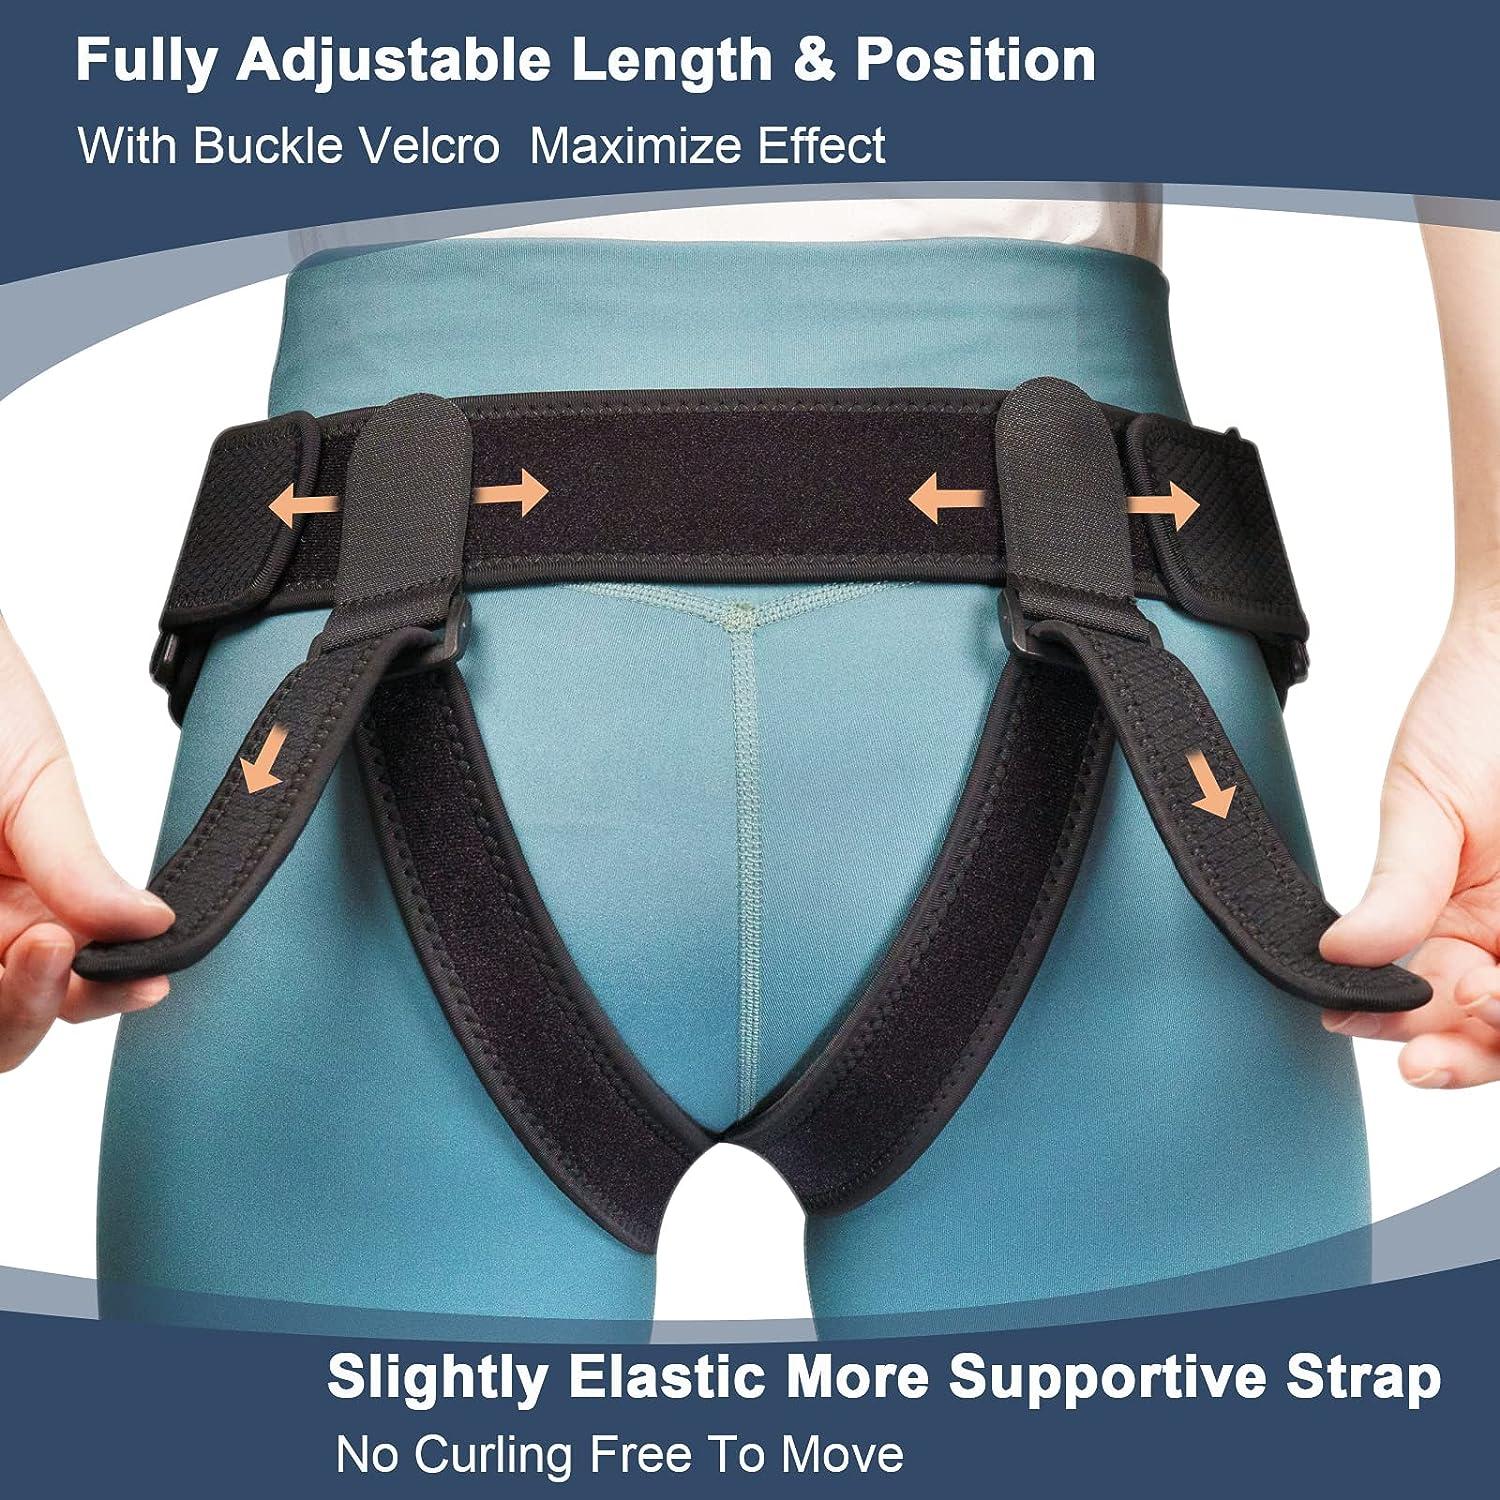 Groin Braces & Pelvic Supports